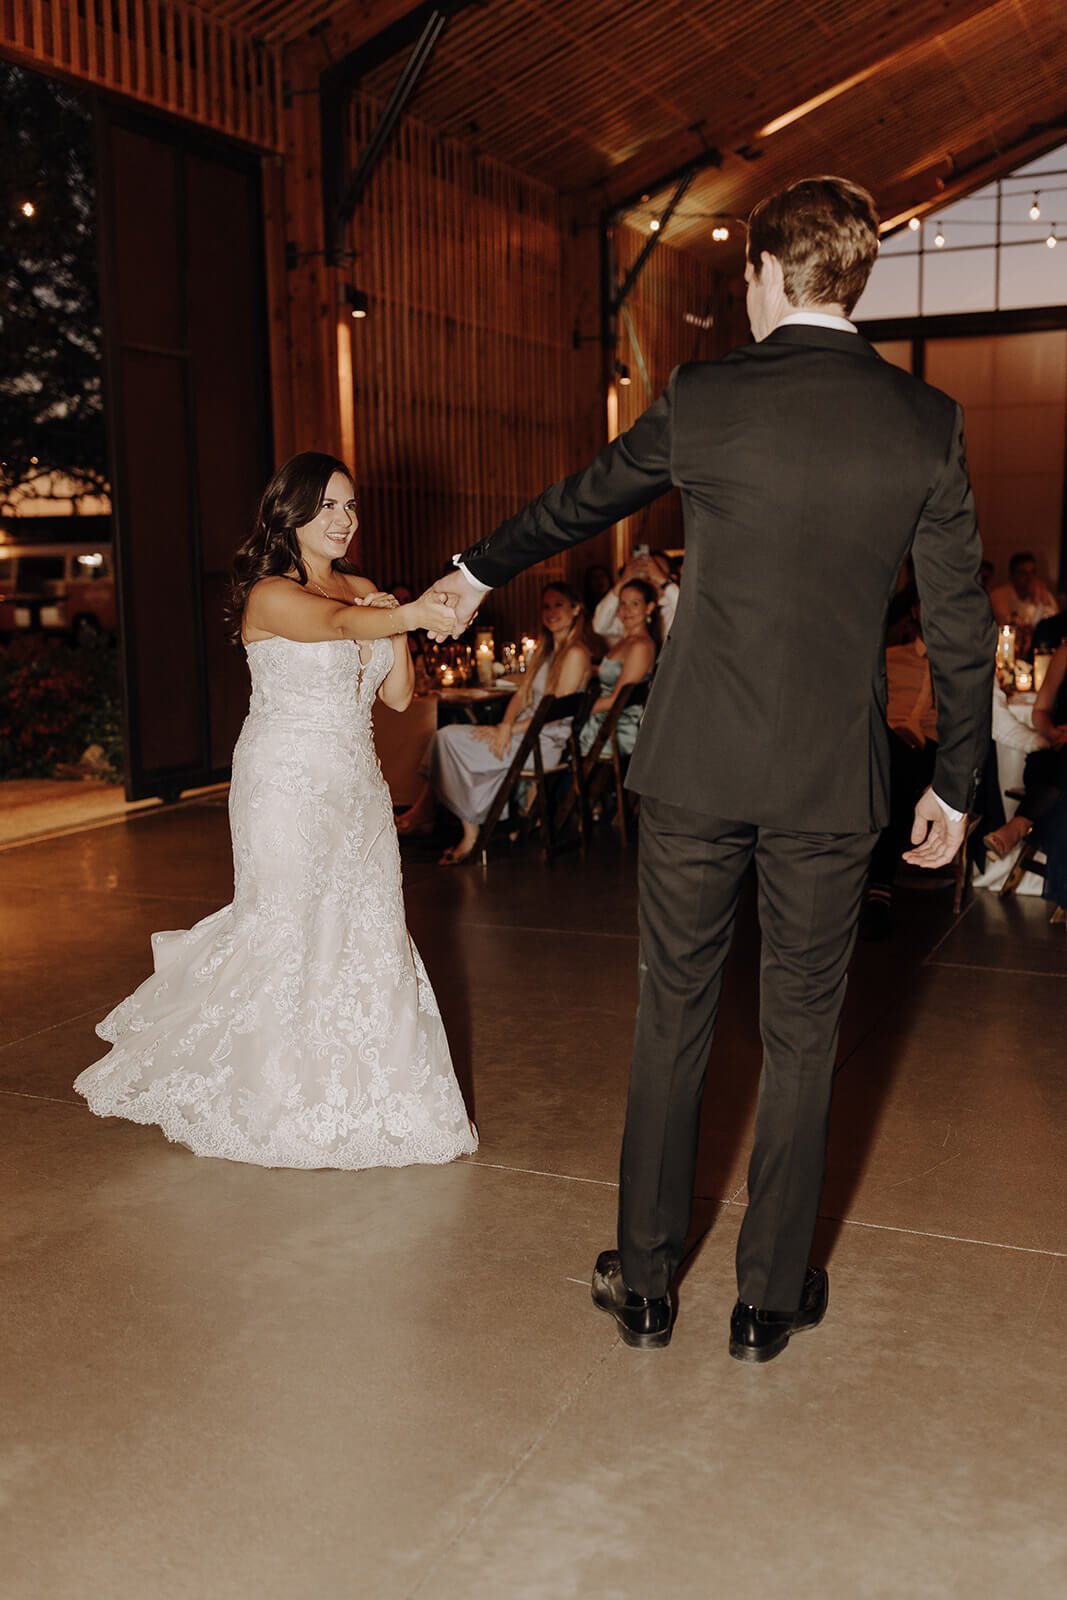 Bride and groom dance on the dance floor at The Paseo wedding venue